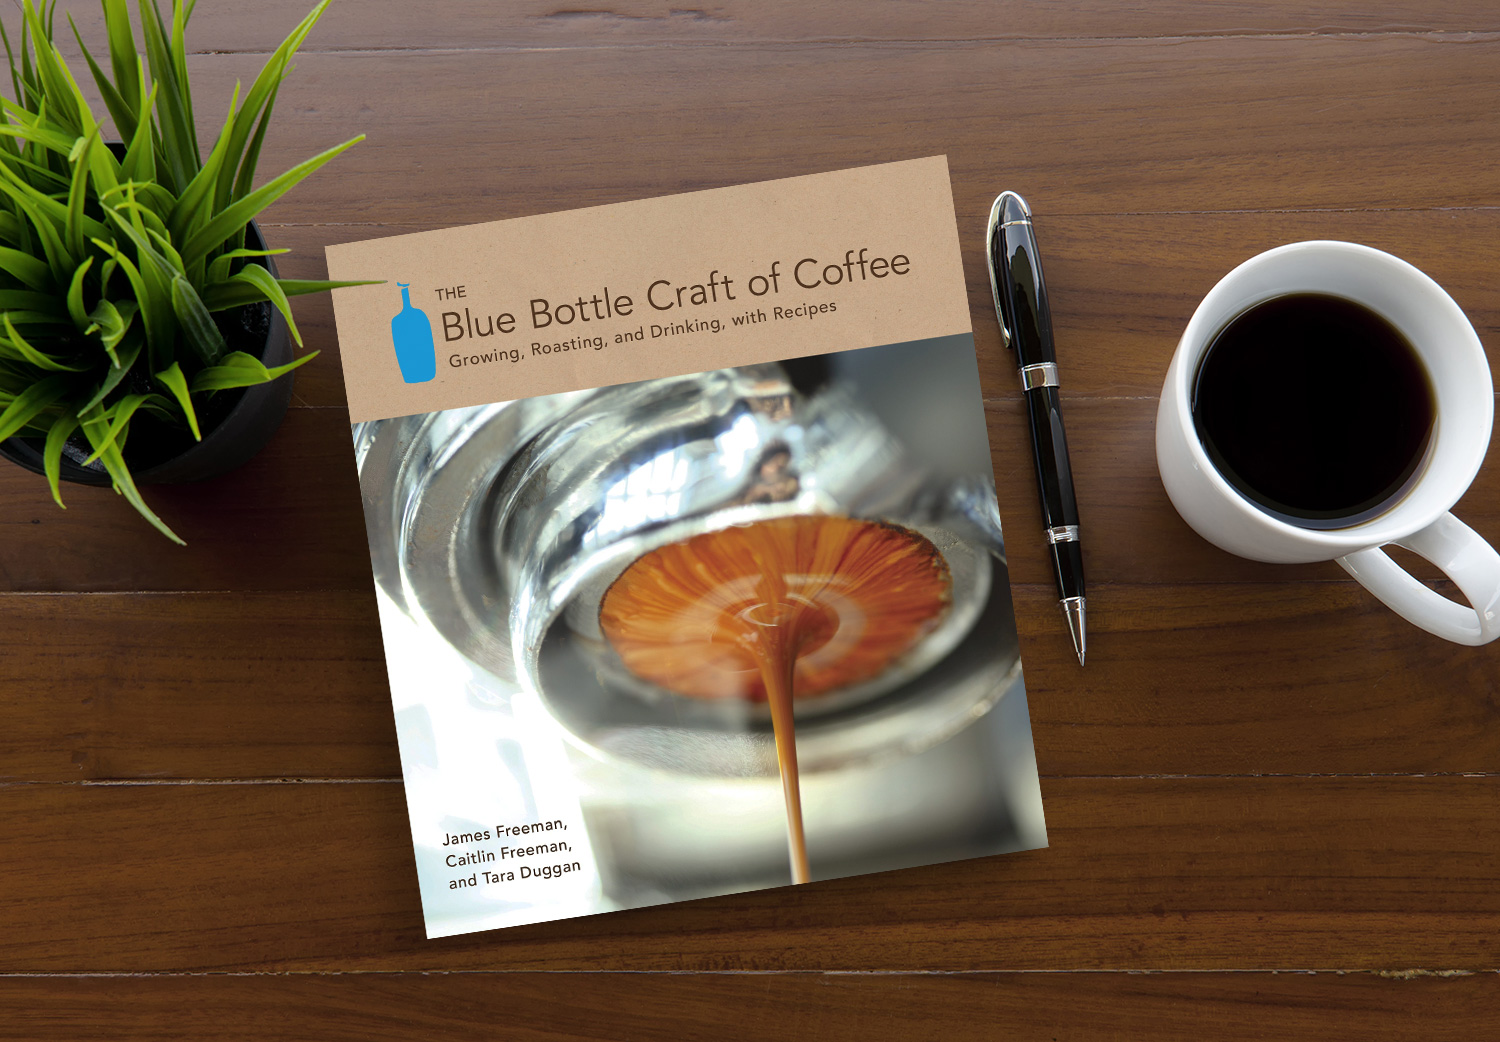 The Blue Bottle Craft of Coffee by James Freeman on a wooden table.